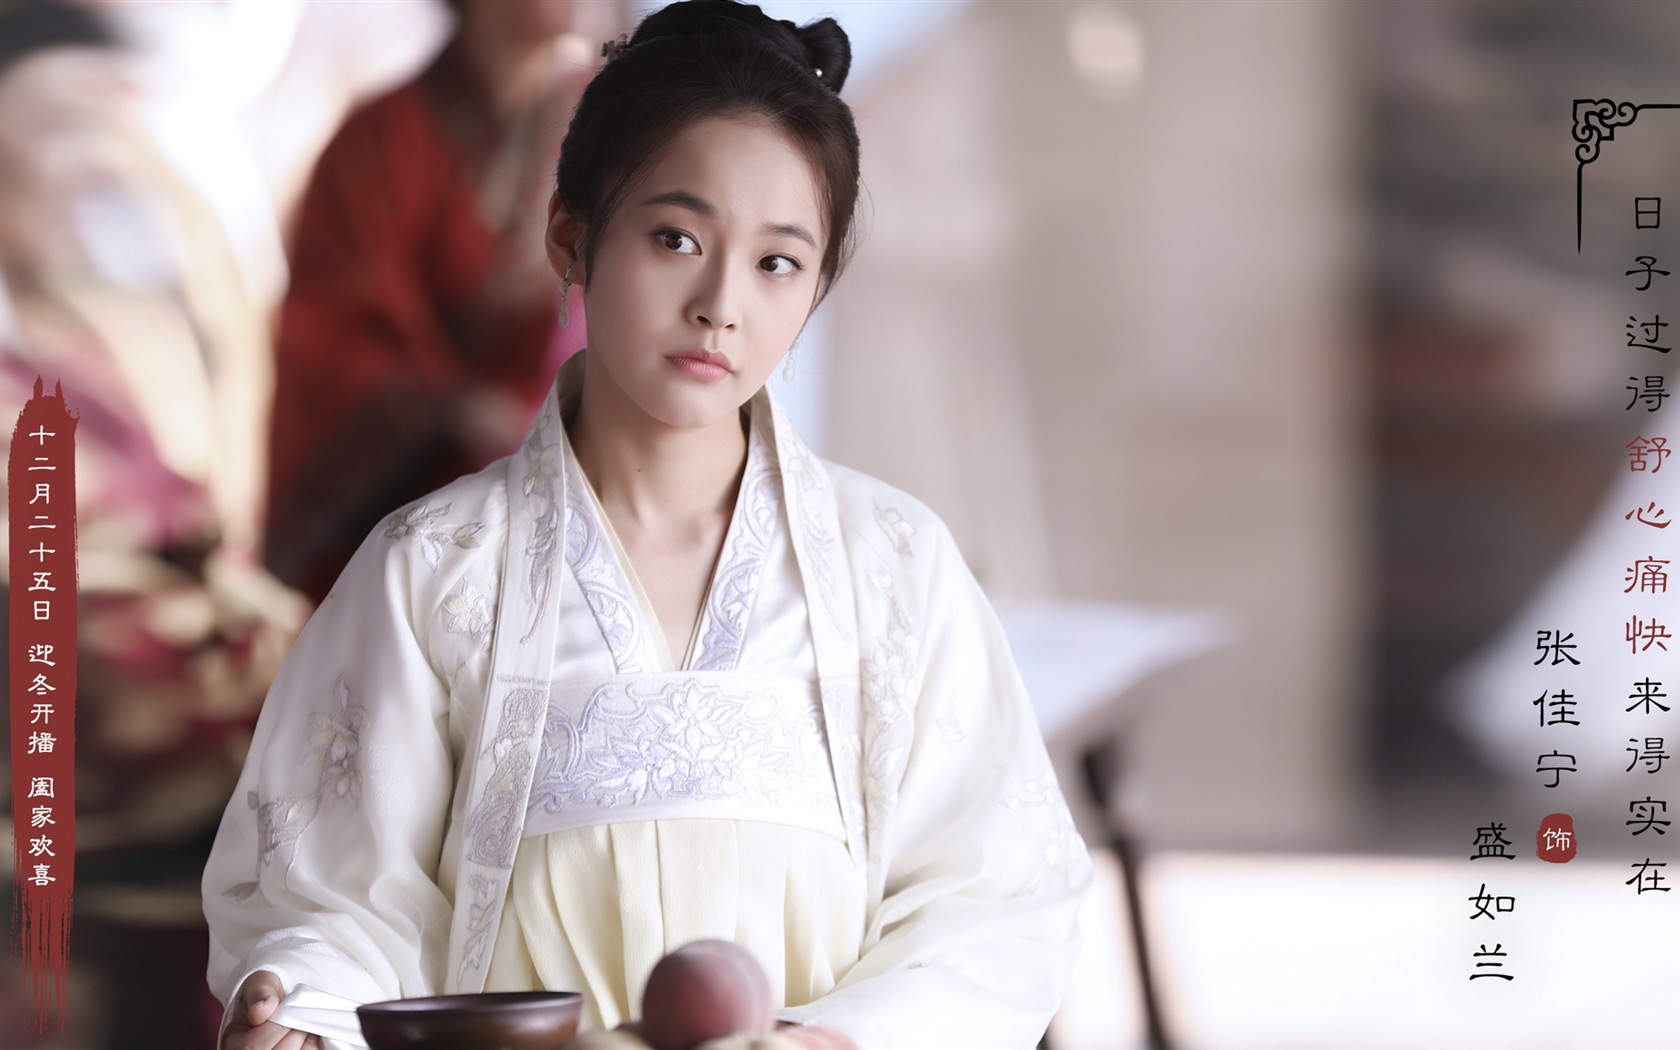 The Story Of MingLan, TV series HD wallpapers #33 - 1680x1050